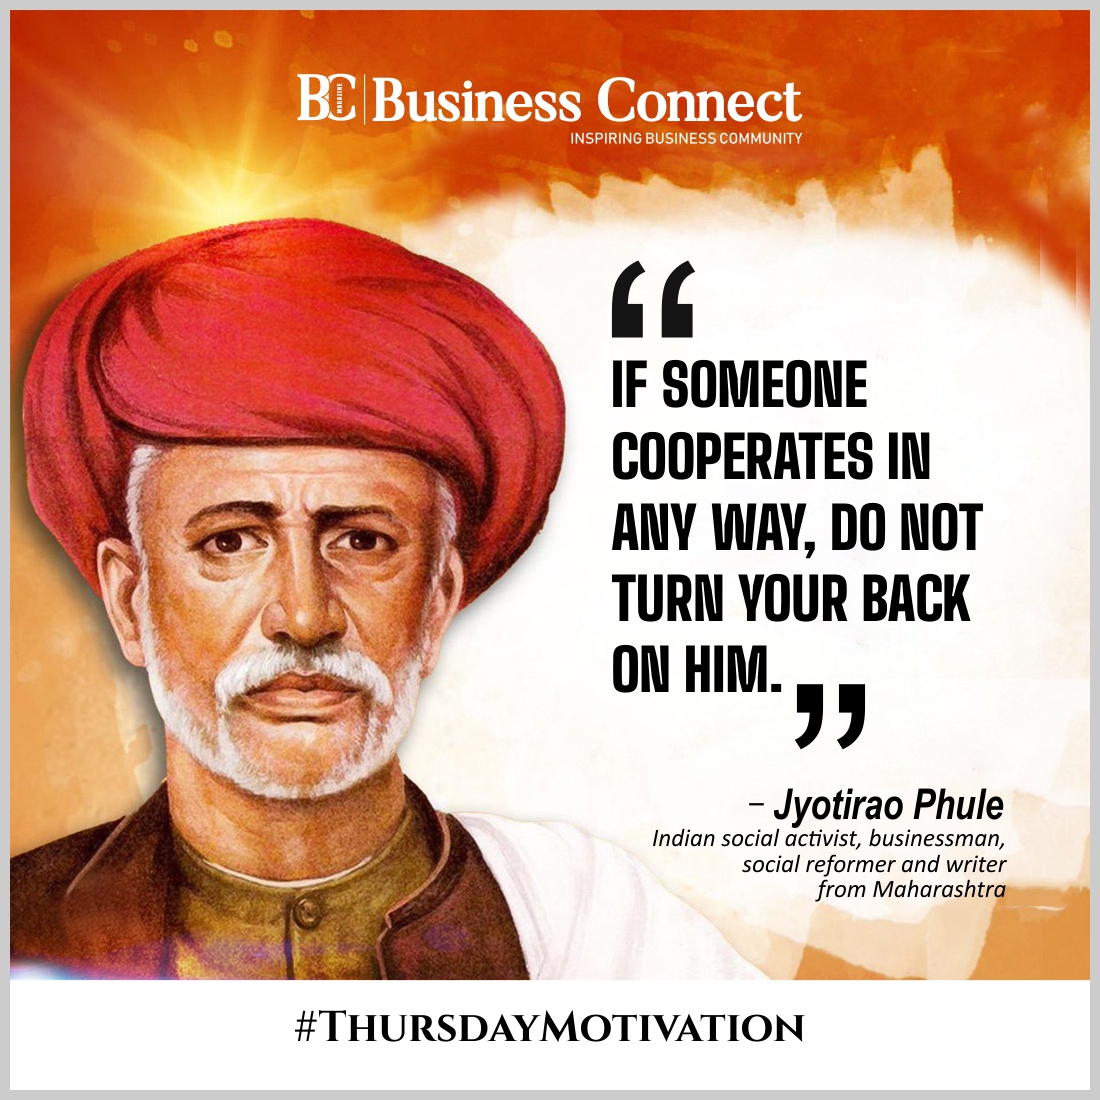 'If someone cooperates in any way, do not turn your back on him.'-Jyotirao Phule

#inspirechange #empowerothers #leadershiplegacy #JyotiraoPhule #socialjustice #educationalreformer #equalityforall #motivation #inspirationalleader #educationalpioneer #humanitarianleader